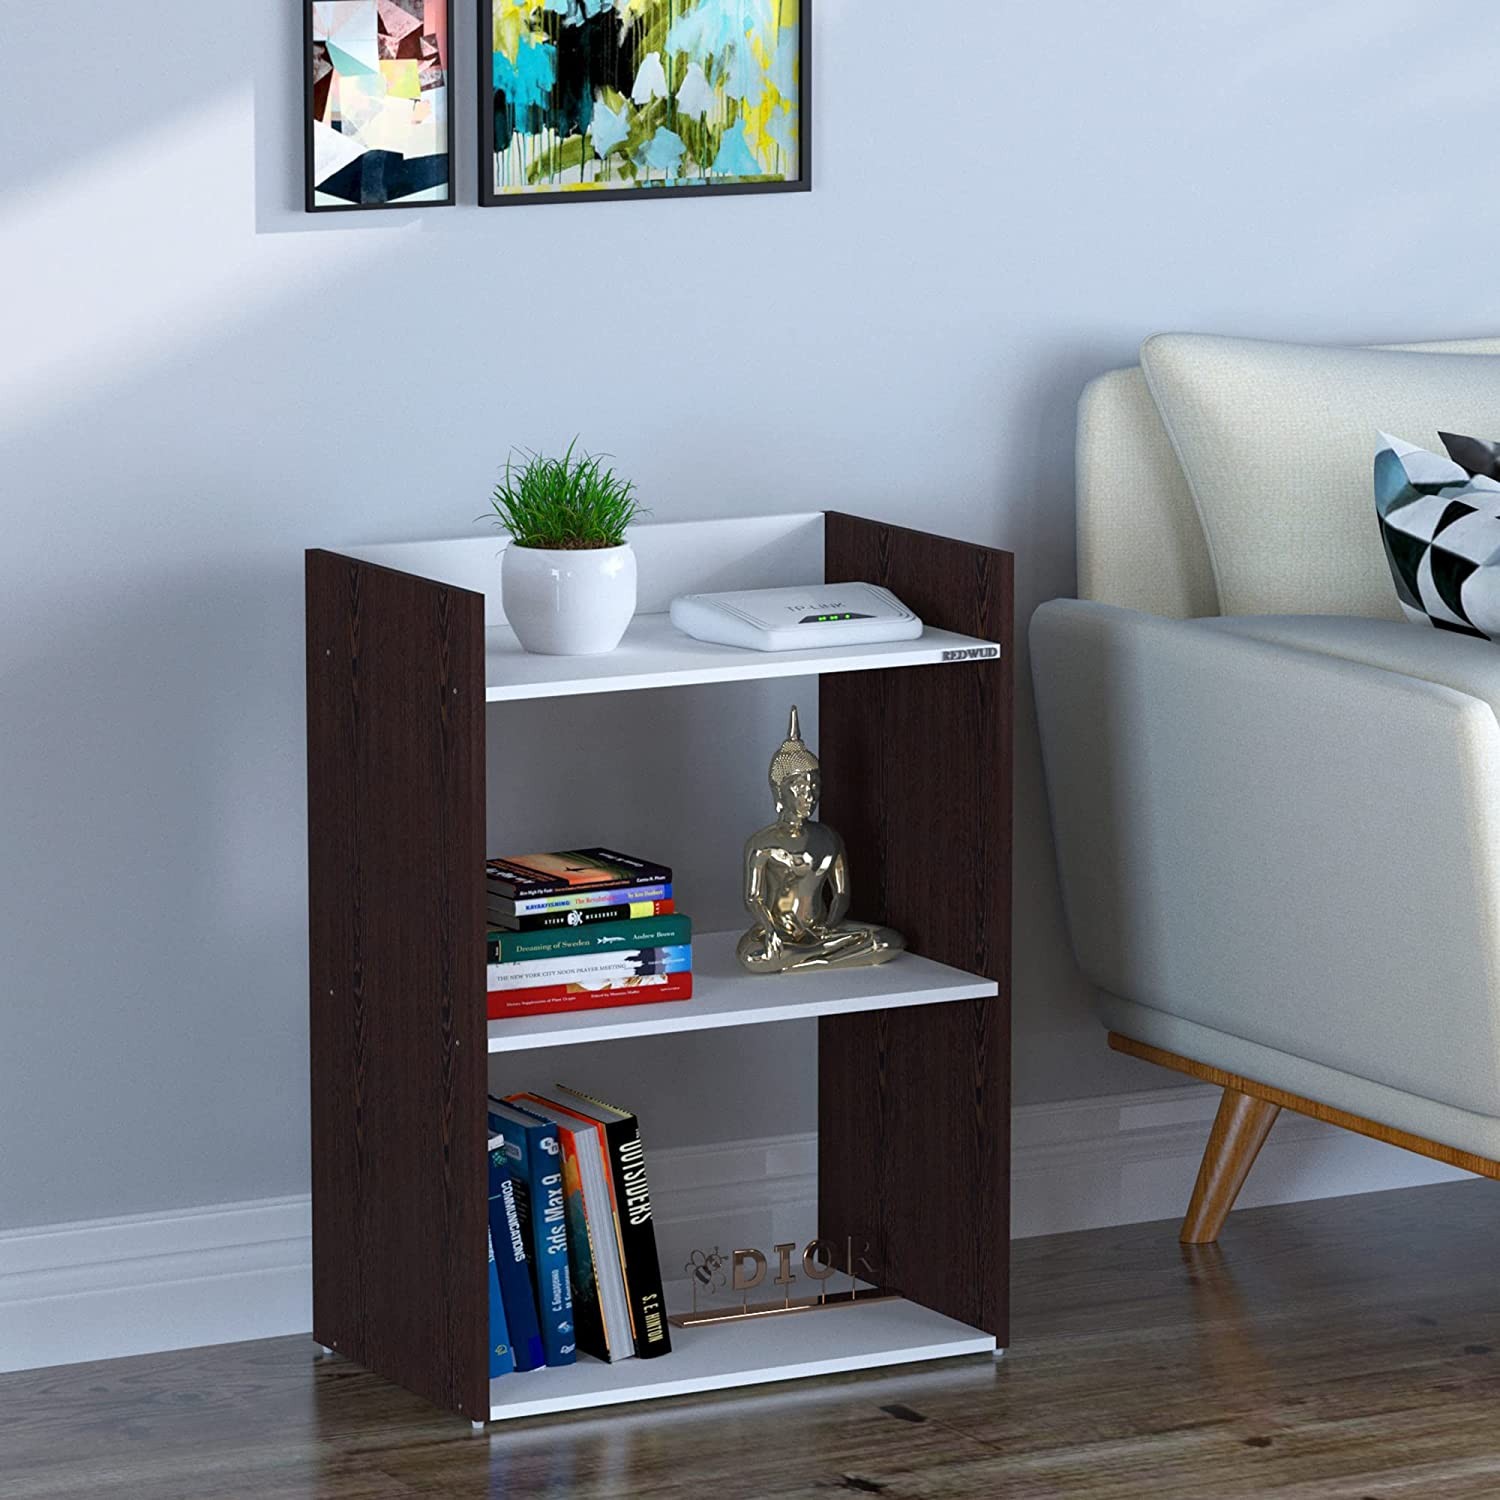 suzie-engineered-wood-bedside-table-end-table-wengewhite-rd-suzie-wwt